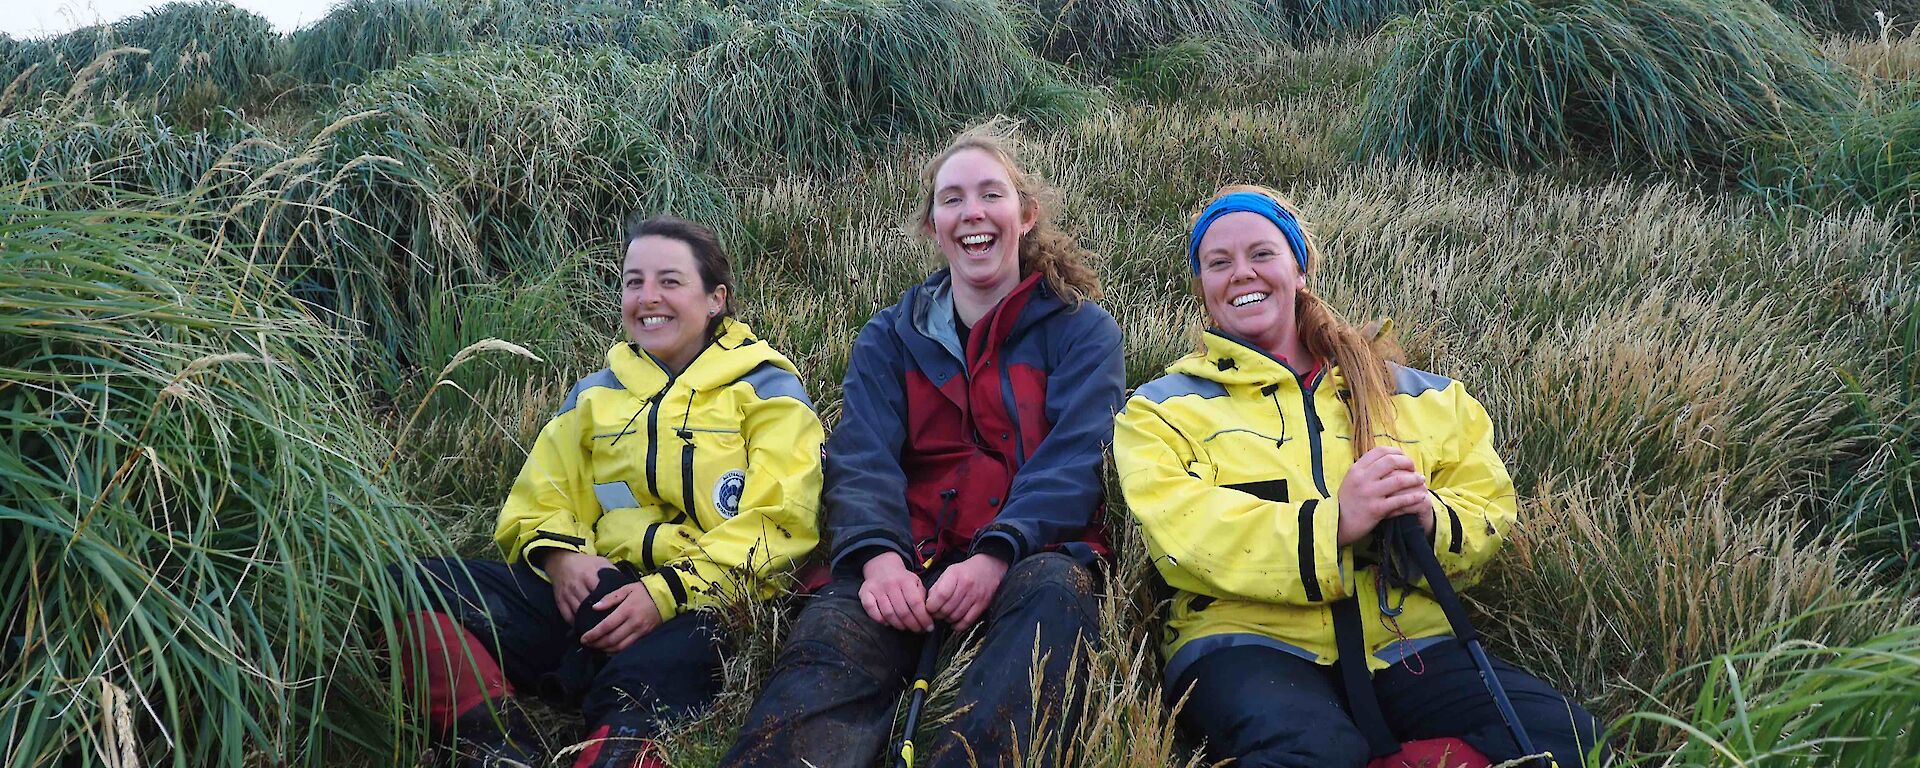 A trio of expeditioners sit smiling on the slope amidst tussocks of grass